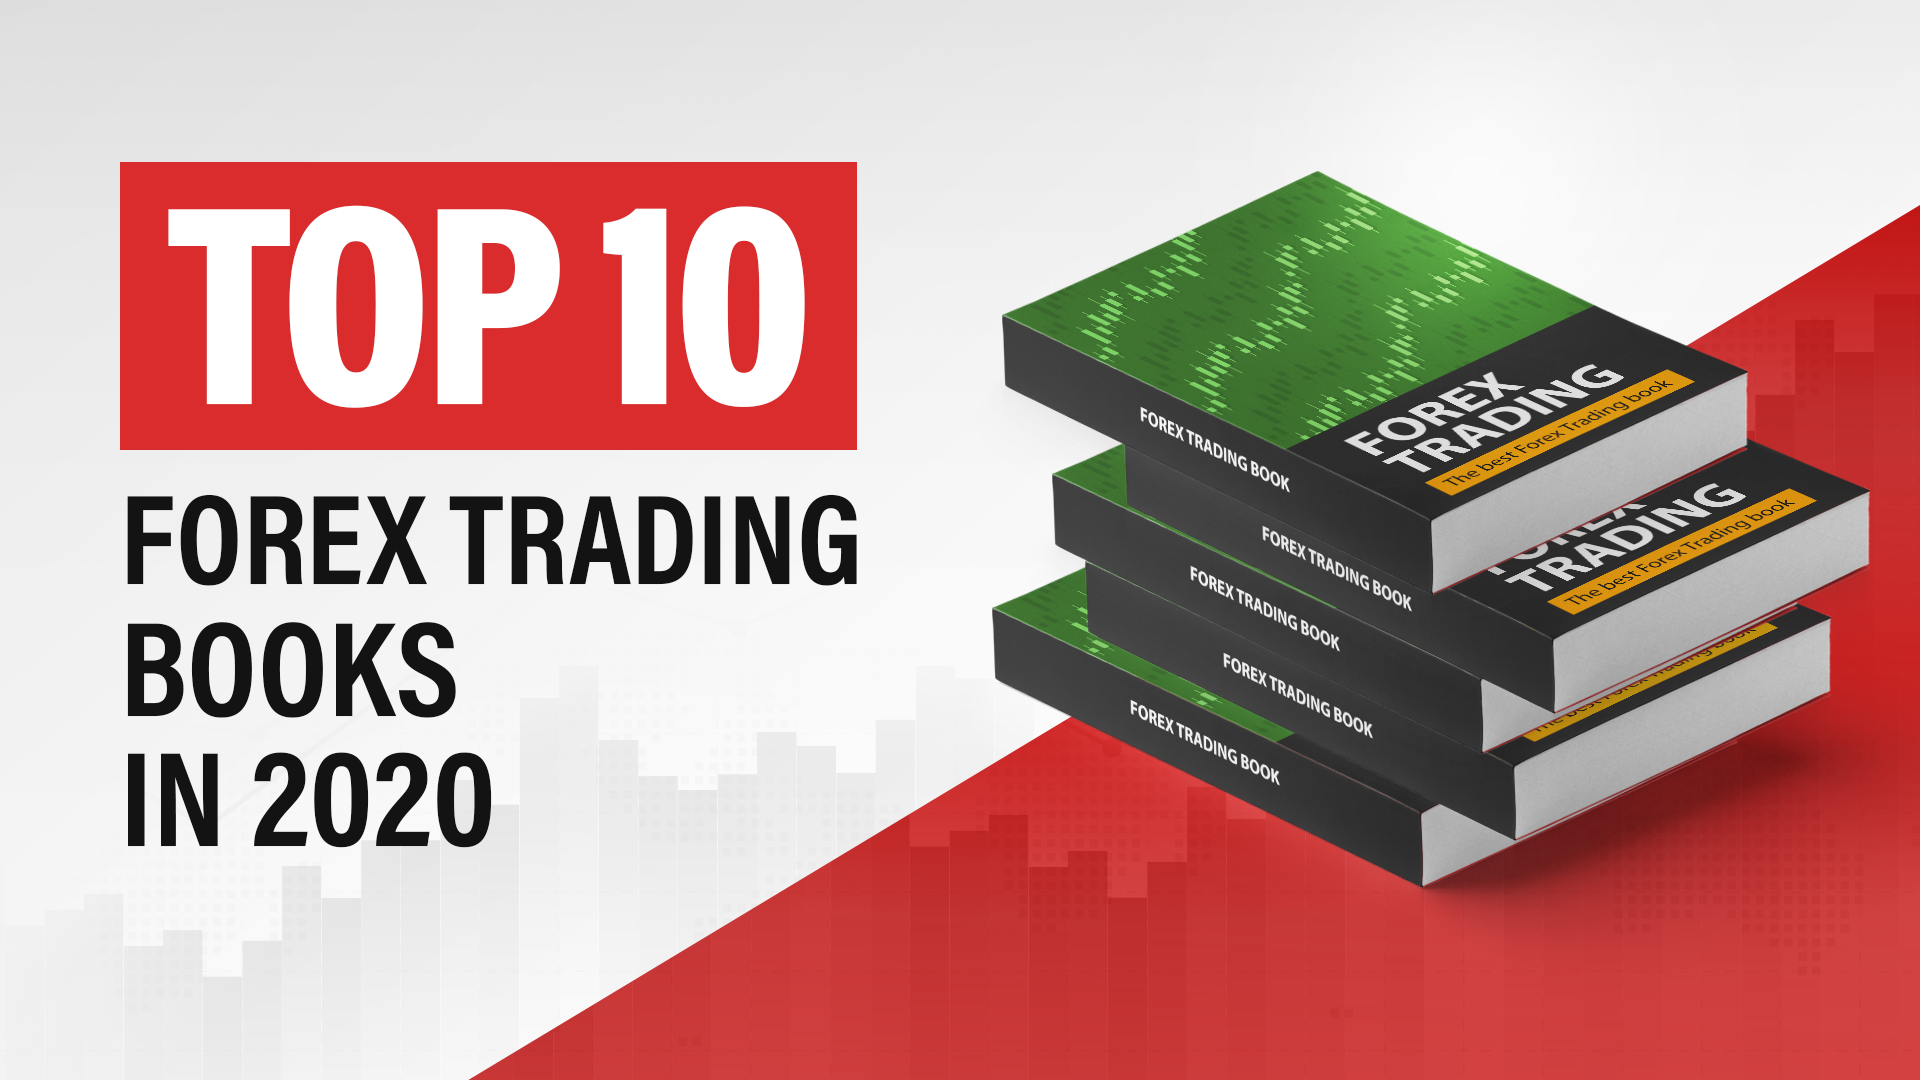 How to trade in forex pdf book luca dezmir forexworld